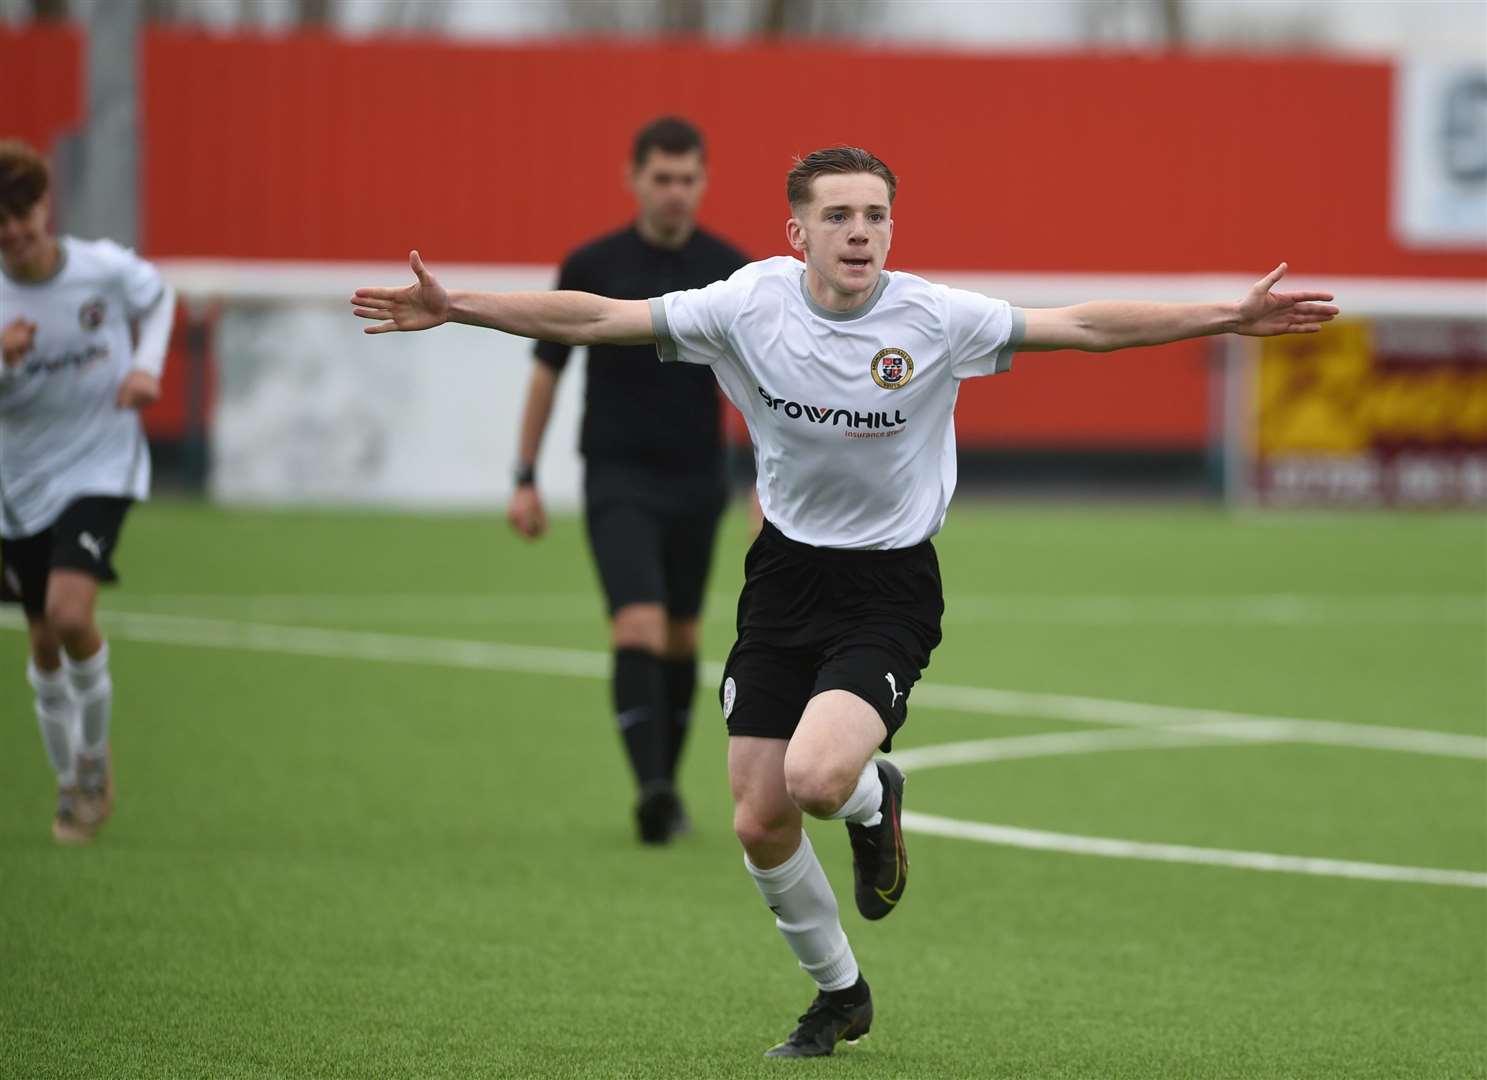 Ryan Jamieson celebrates the fifth goal for Bromley under-15s. Picture: PSP Images